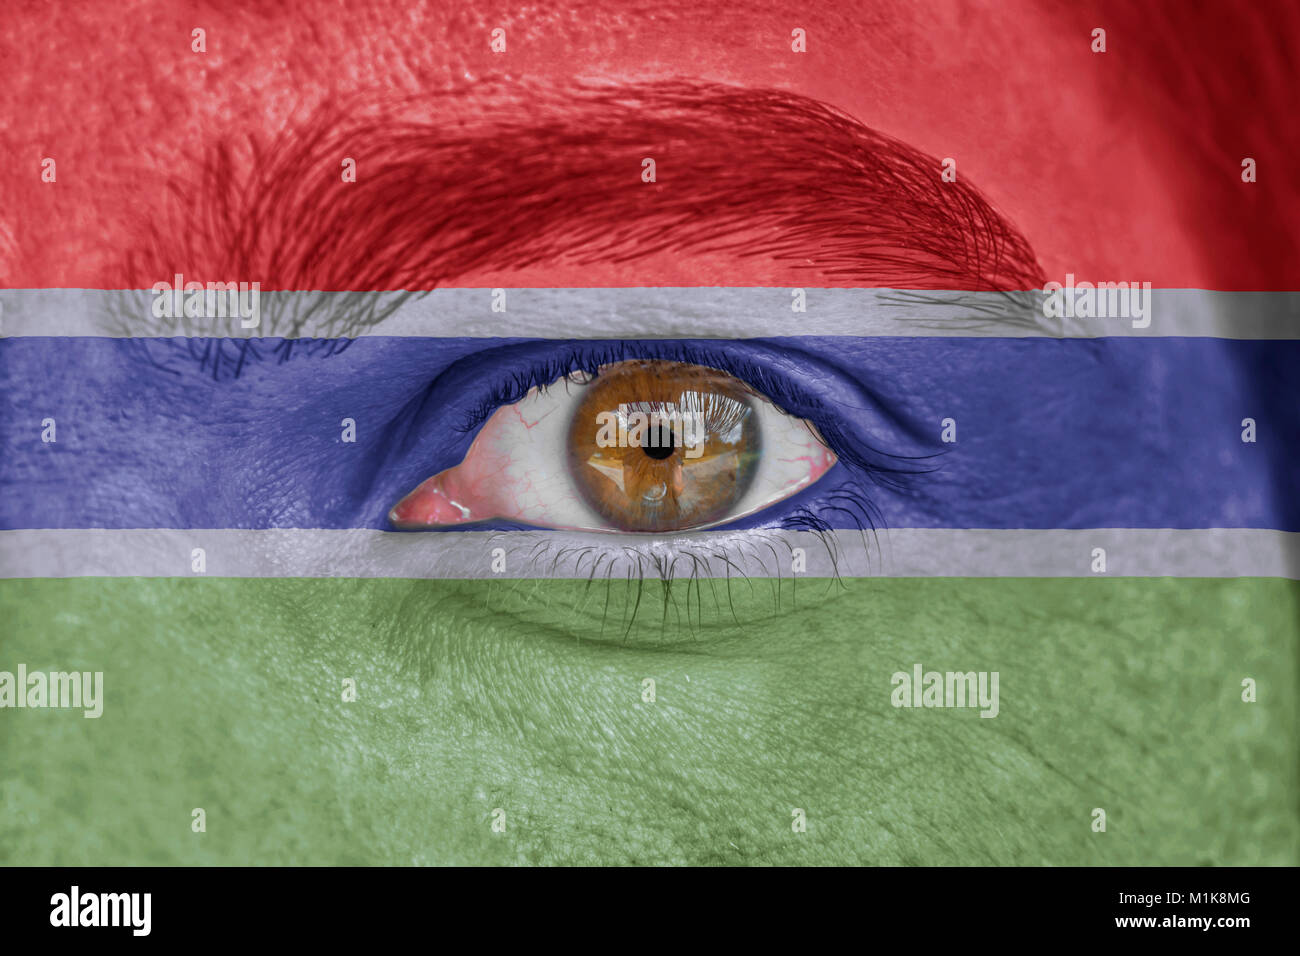 Human face and eye painted with flag of Gambia Stock Photo